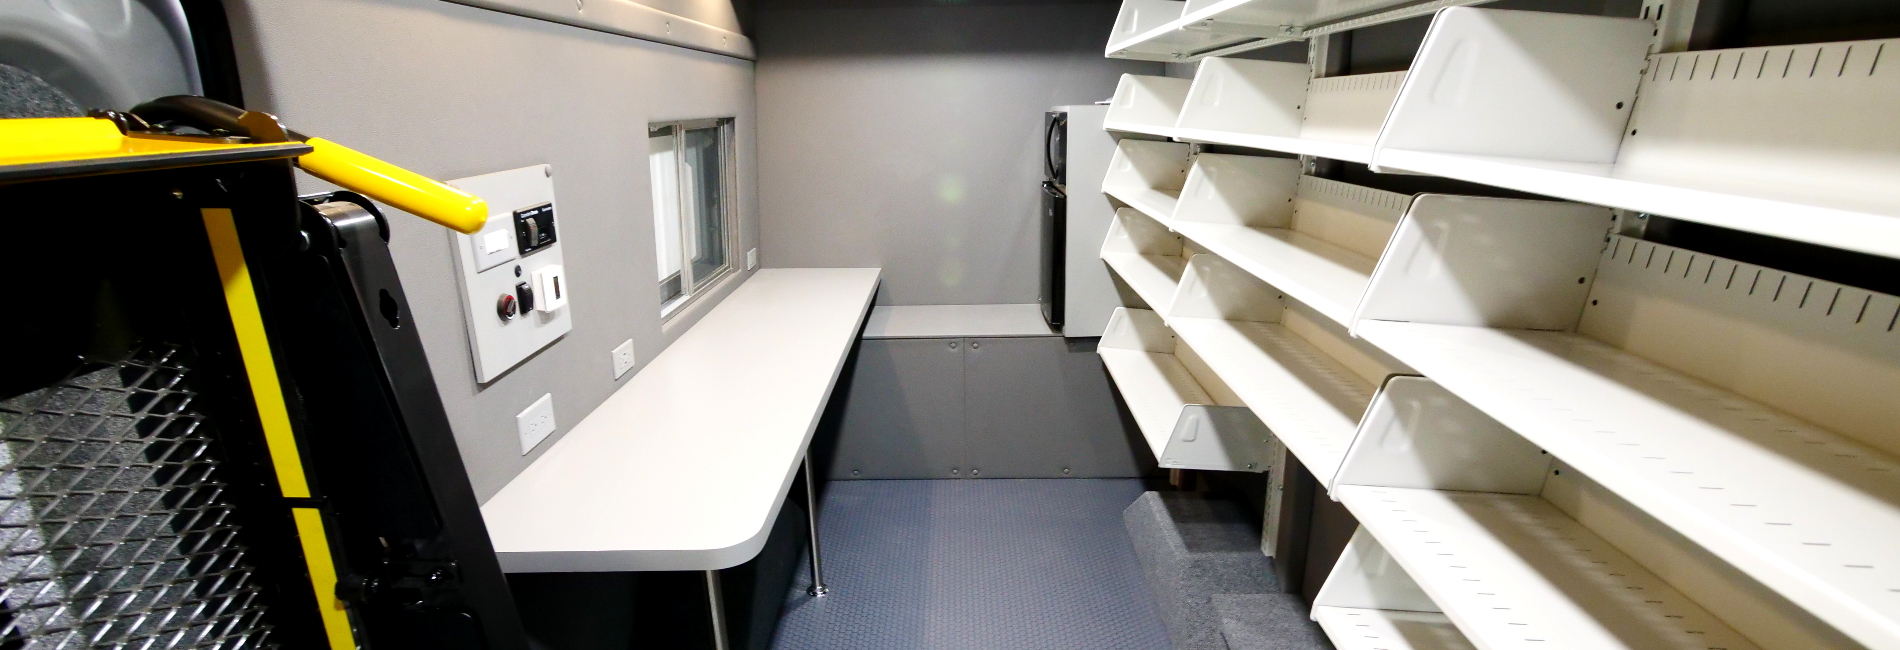 Library bookmobile that is capable of holding vast assortment of books with a lift, sliding window, and workstation.